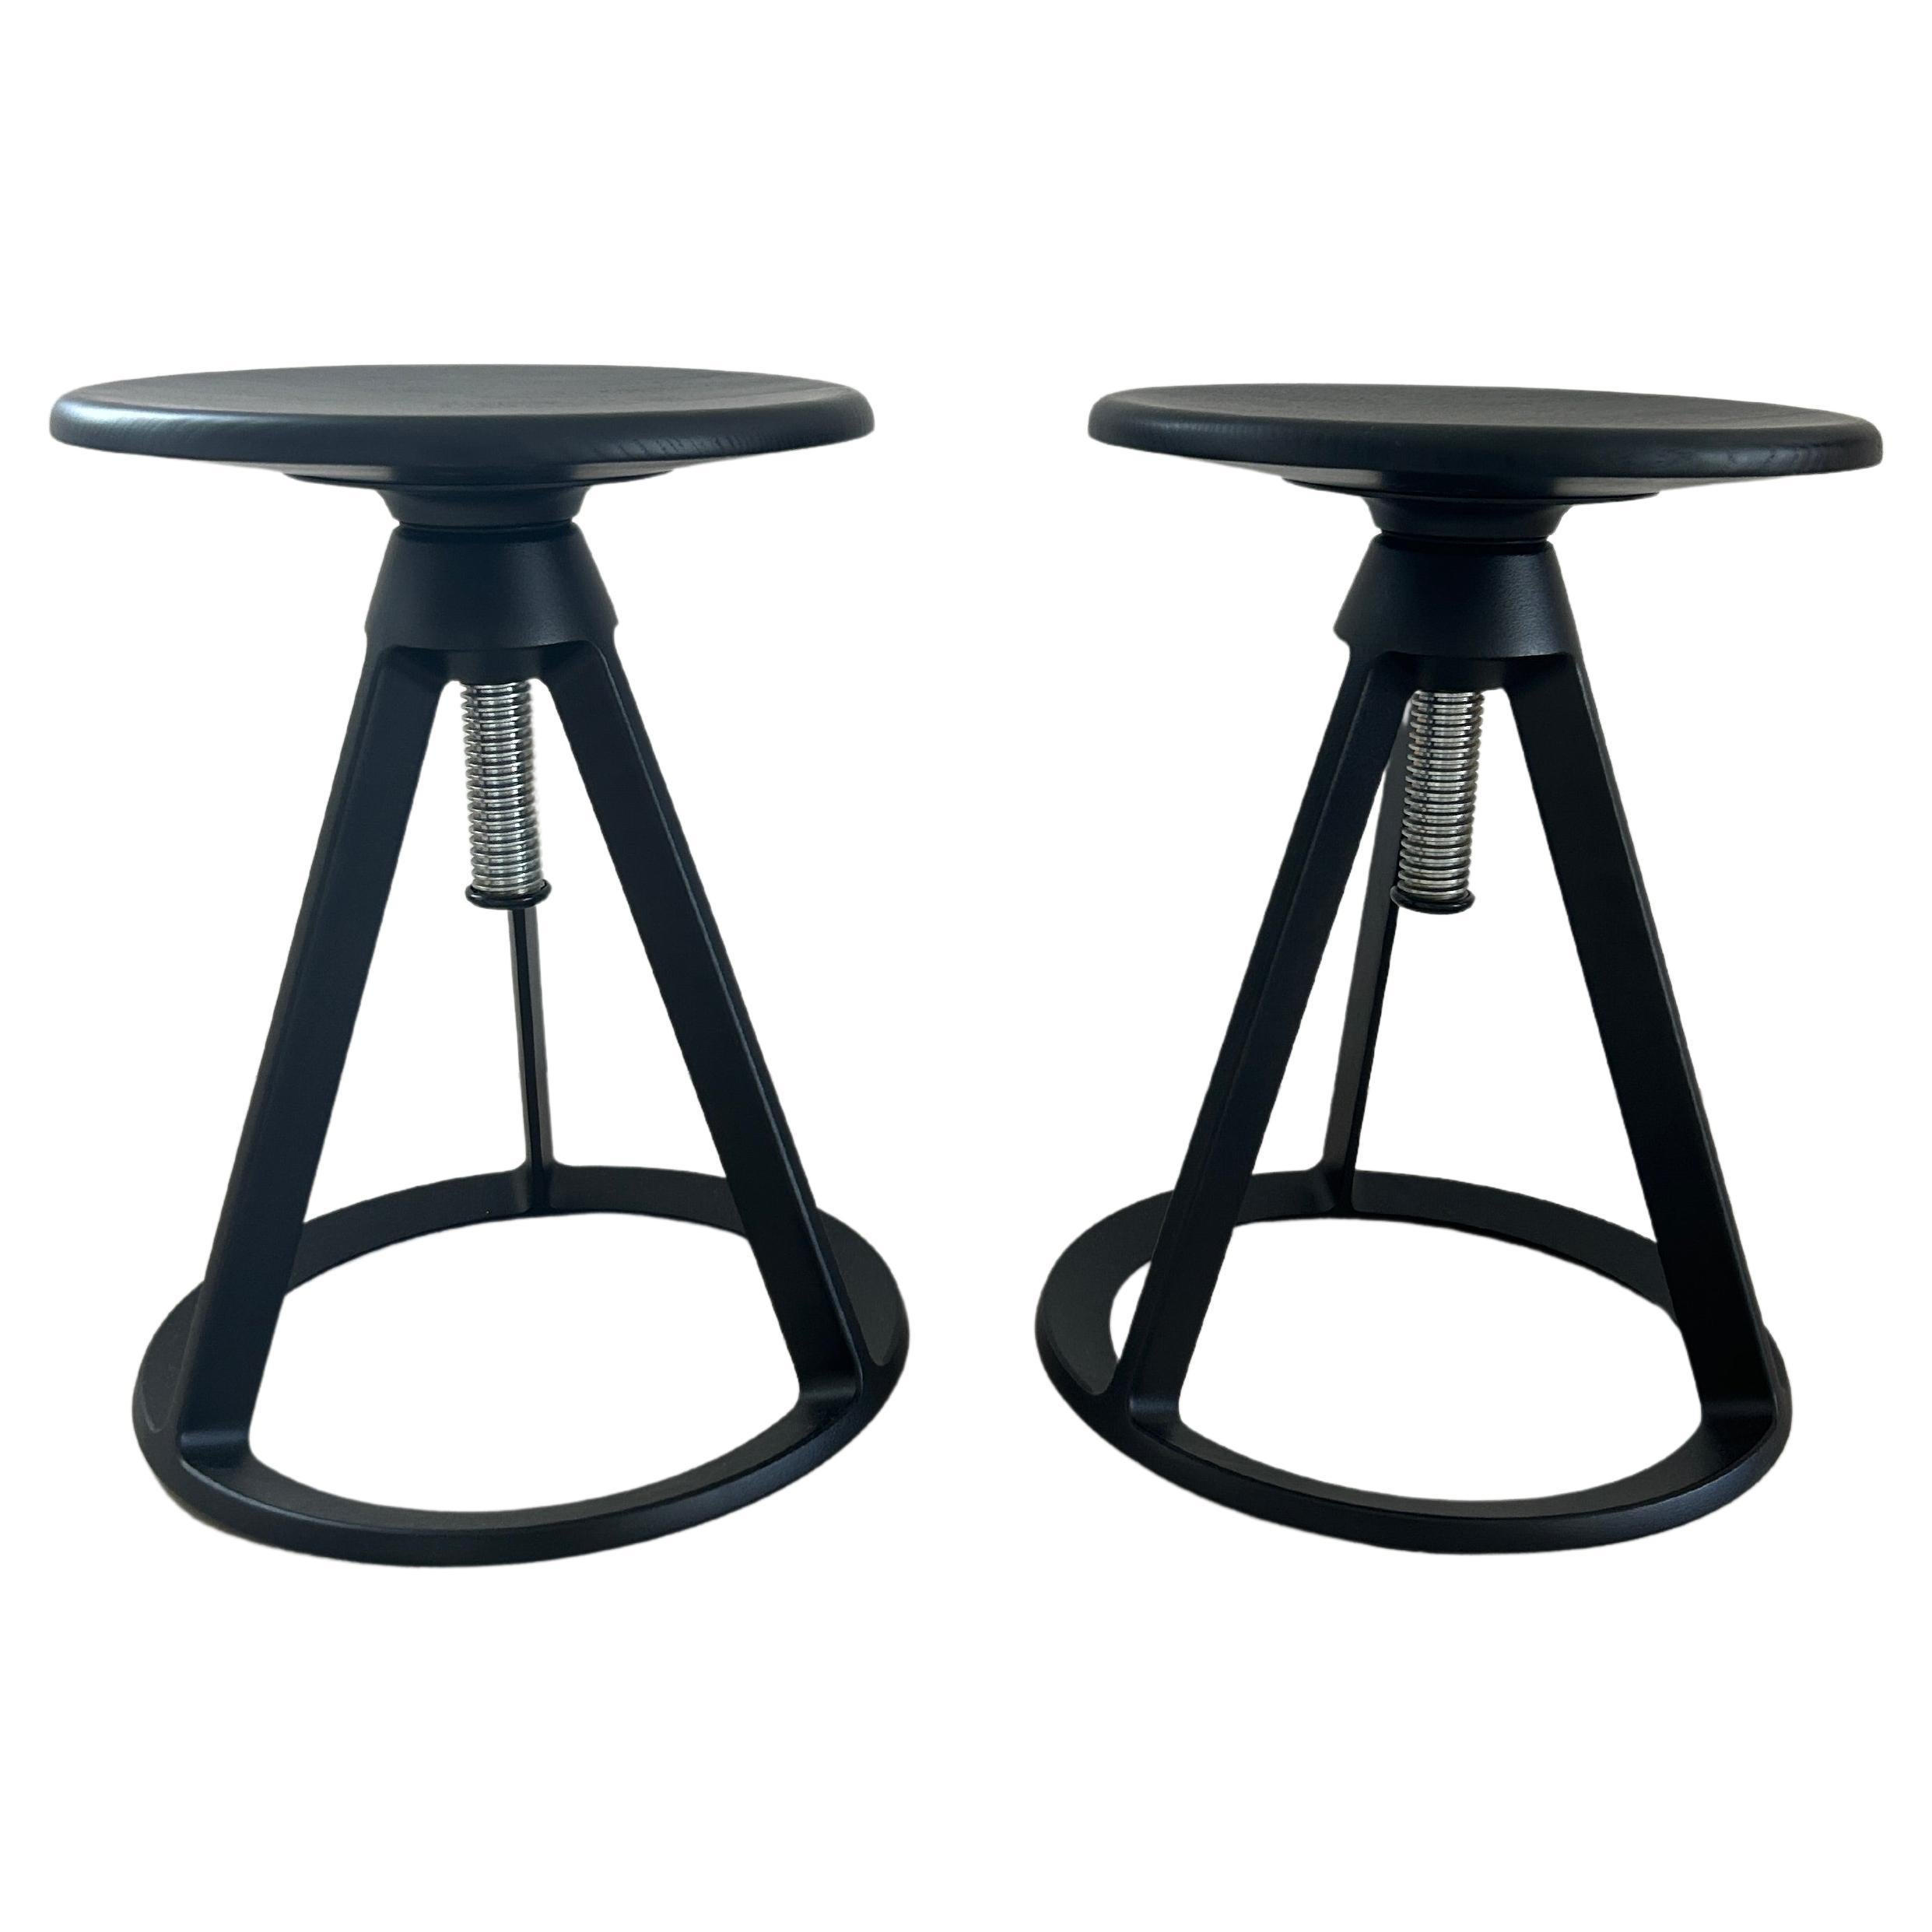 Pair of Modern Edward Barber and Jay Osgerby for Knoll Piton Stools Black